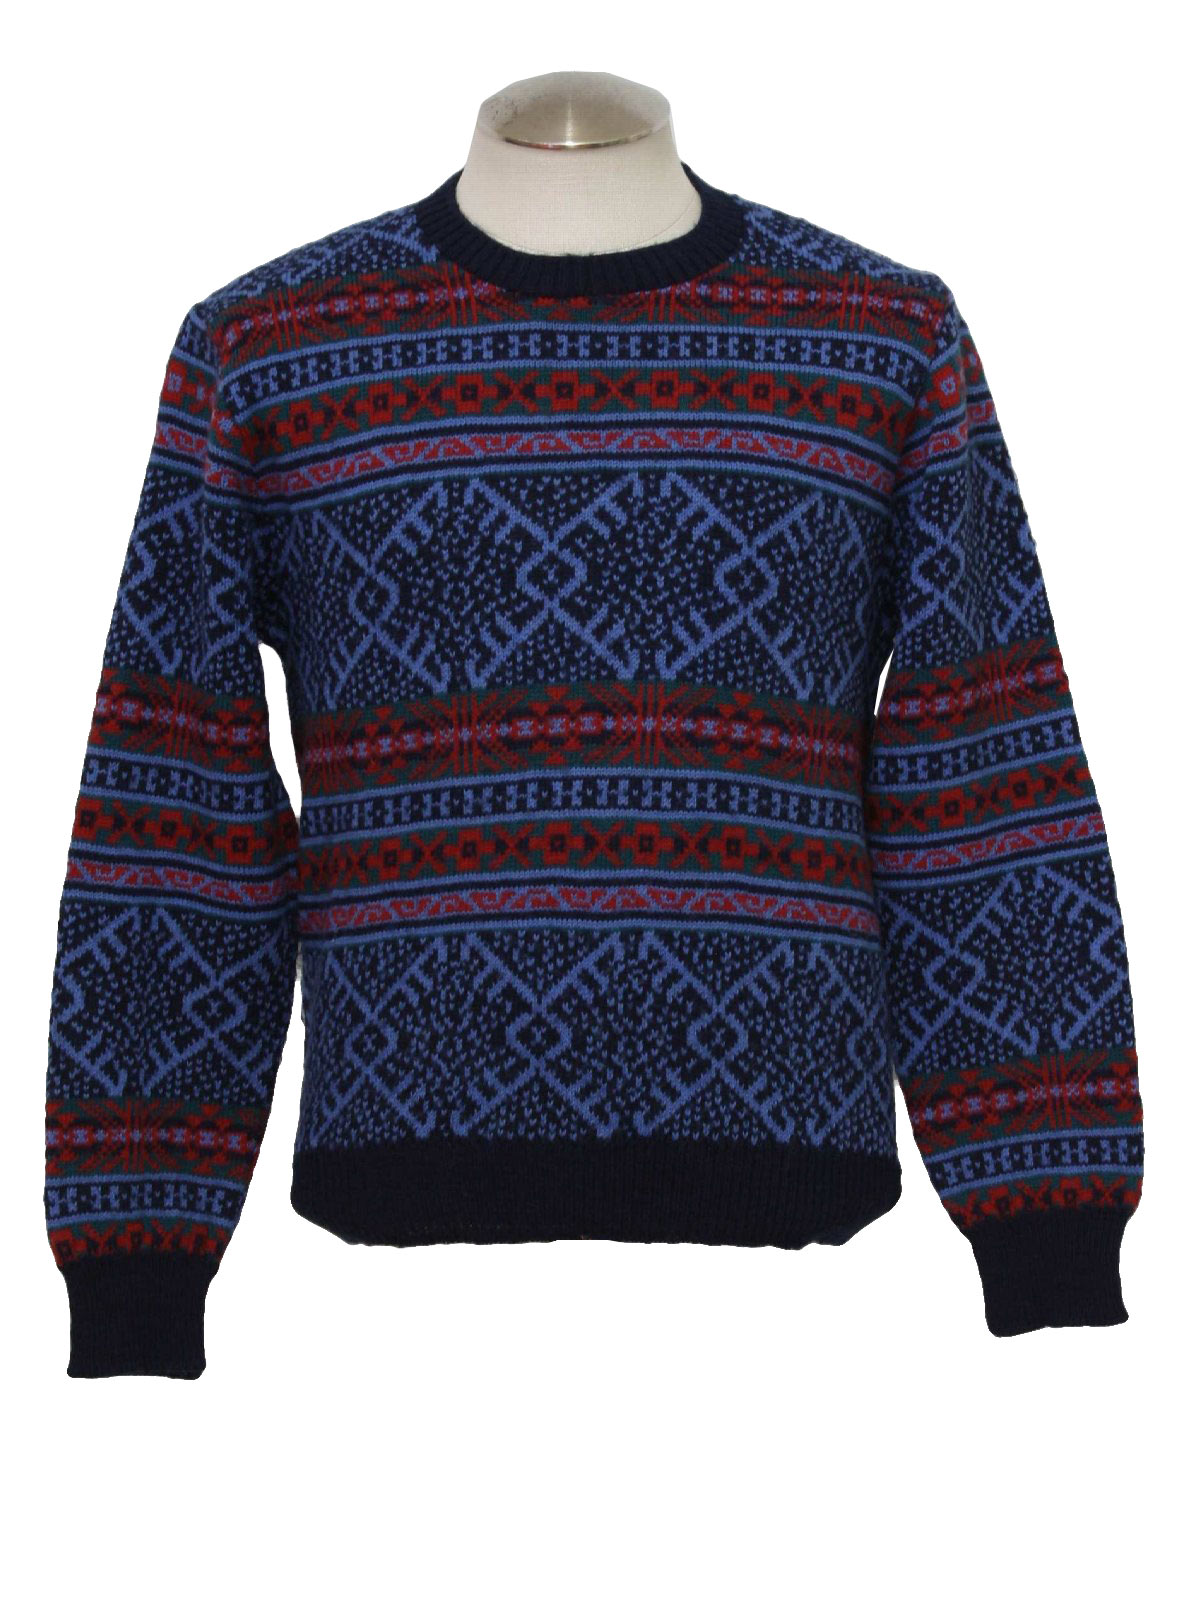 80s Retro Sweater: Late 80s or early 90s -Reed St. James- Mens royal ...